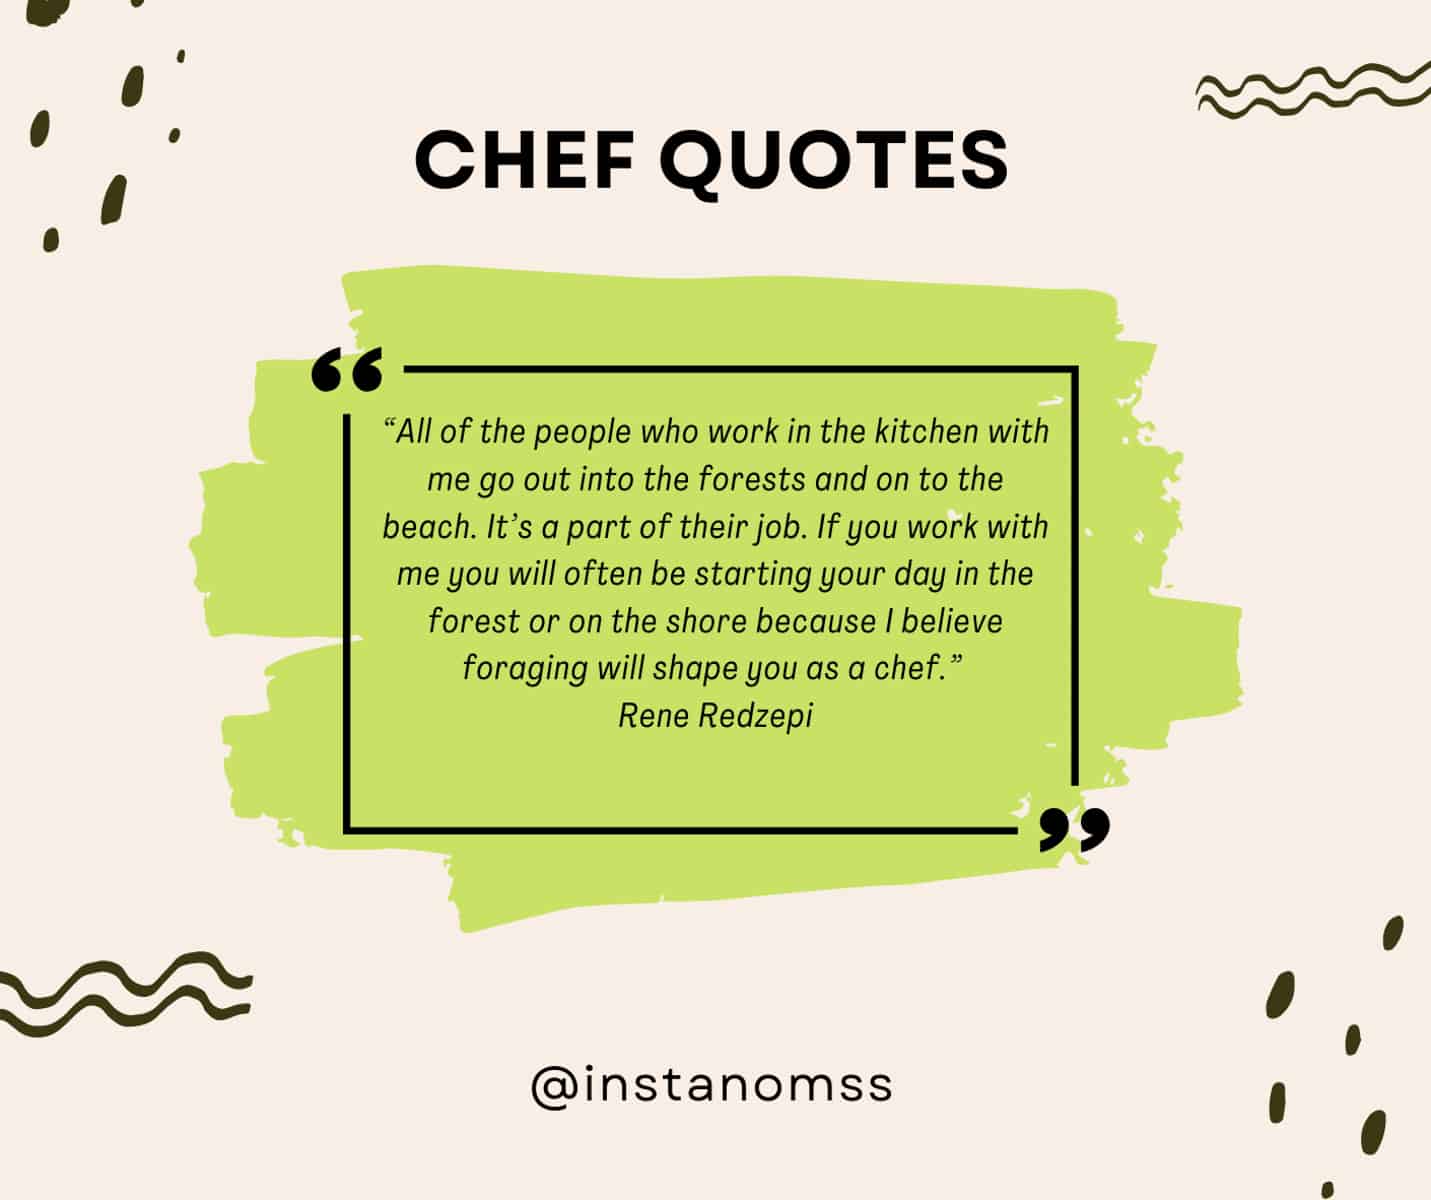 “All of the people who work in the kitchen with me go out into the forests and on to the beach. It’s a part of their job. If you work with me you will often be starting your day in the forest or on the shore because I believe foraging will shape you as a chef.” Rene Redzepi